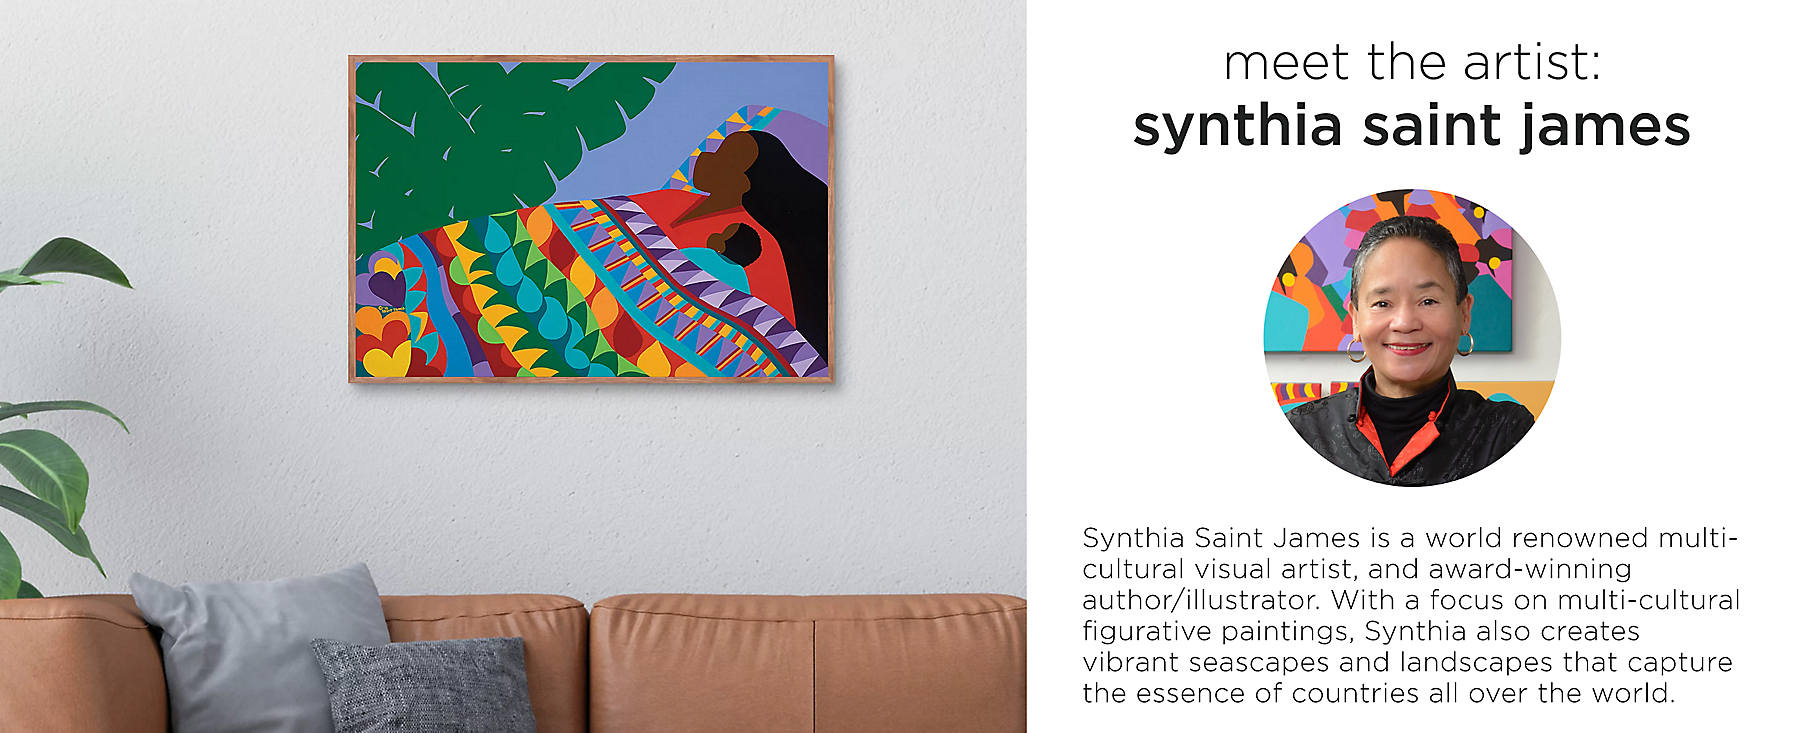 Meet the artist: Synthia Saint James is a world renowned multi-cultural visual artist, and award-winning author/illustrator. With a focus on multi-cultural figurative paintings, Synthia also creates vibrant seascapes and landscapes that capture the essence of countries all over the world.